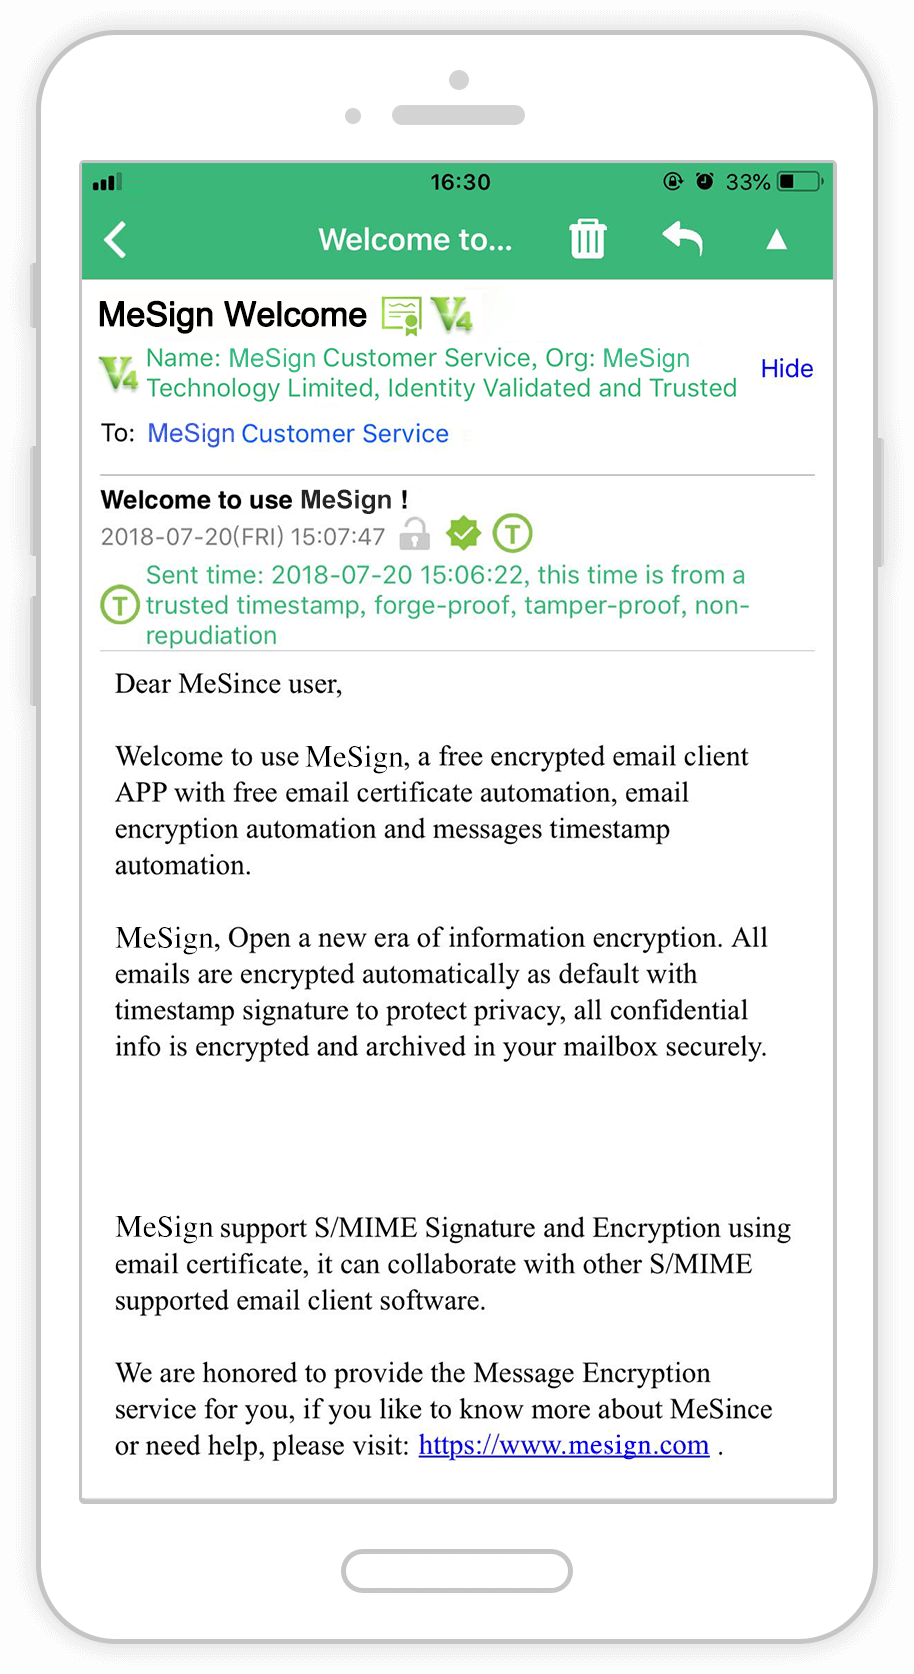 Add trusted timestamp signature to every outgoing email to attest the time of email sent